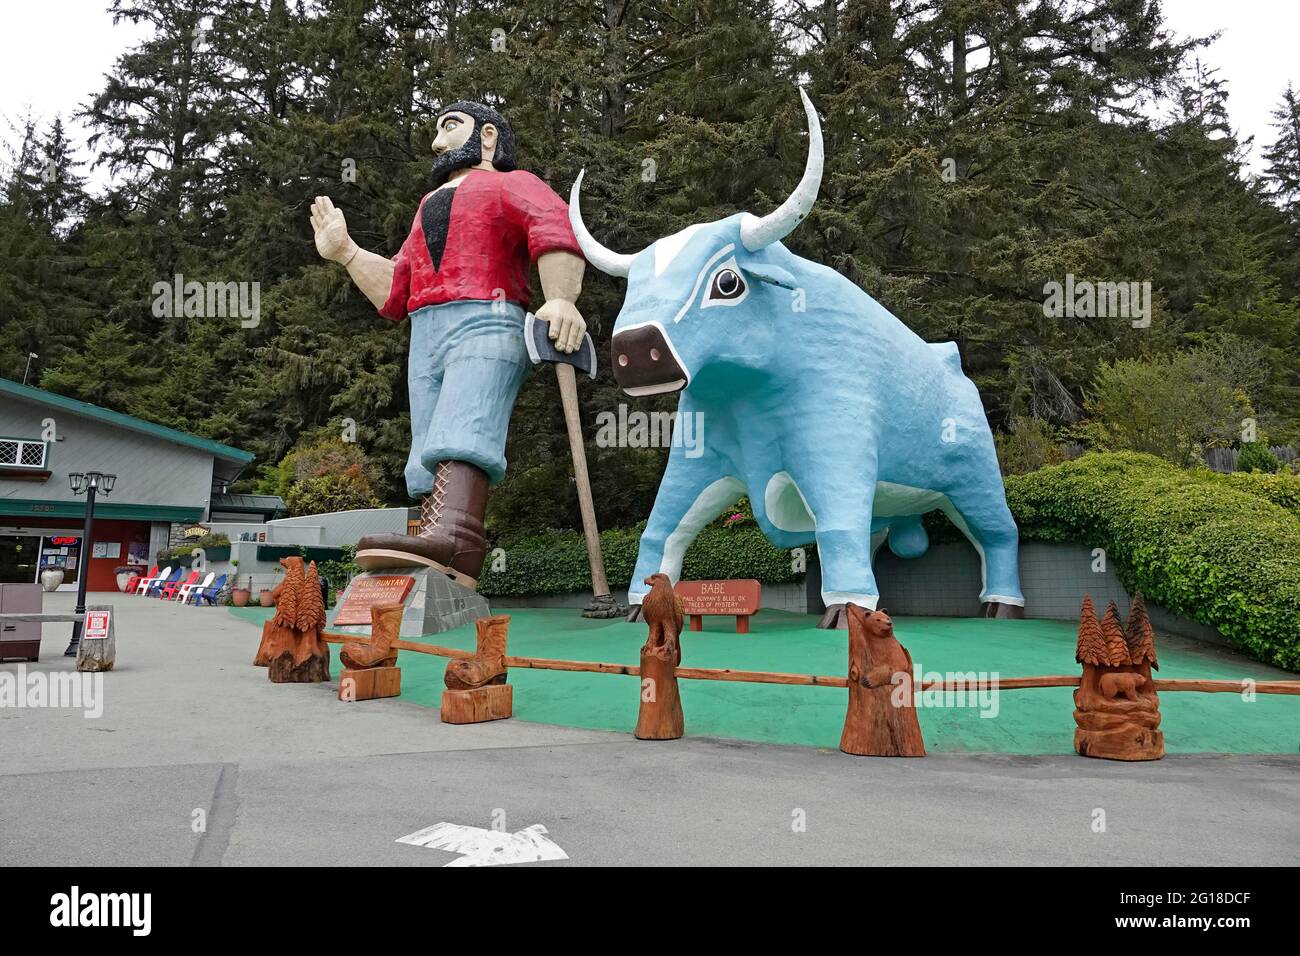 A portrait of Paul Bunyan and Babe, The Blue Ox, at the Trees Of Mystery, in Klamath, California. Stock Photo